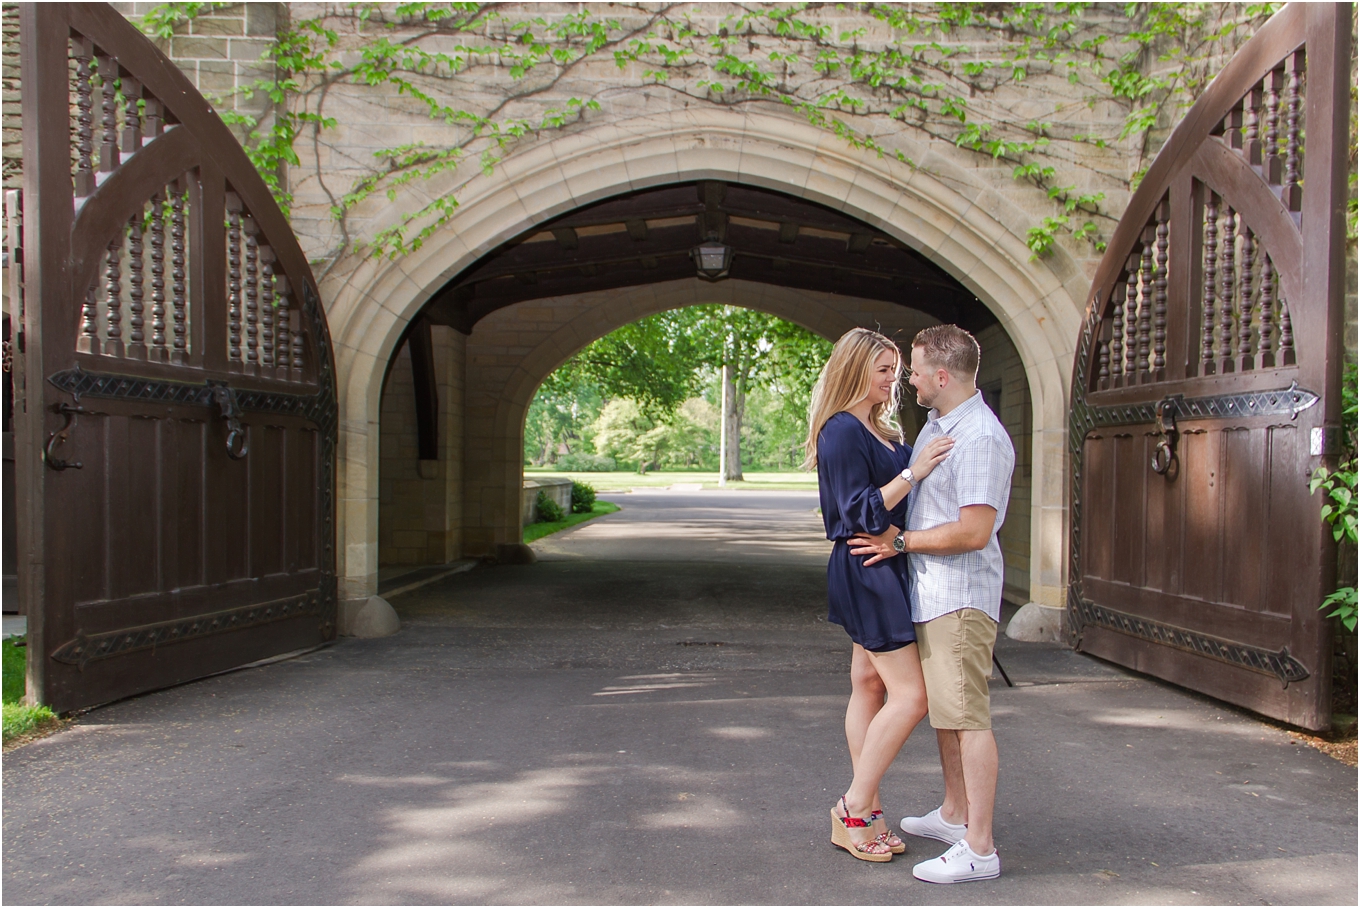 best-of-2016-engagement-photos-with-courtney-carolyn-photography-romantic-timeless-candid-wedding-photographer-in-detroit-mi_0020.jpg